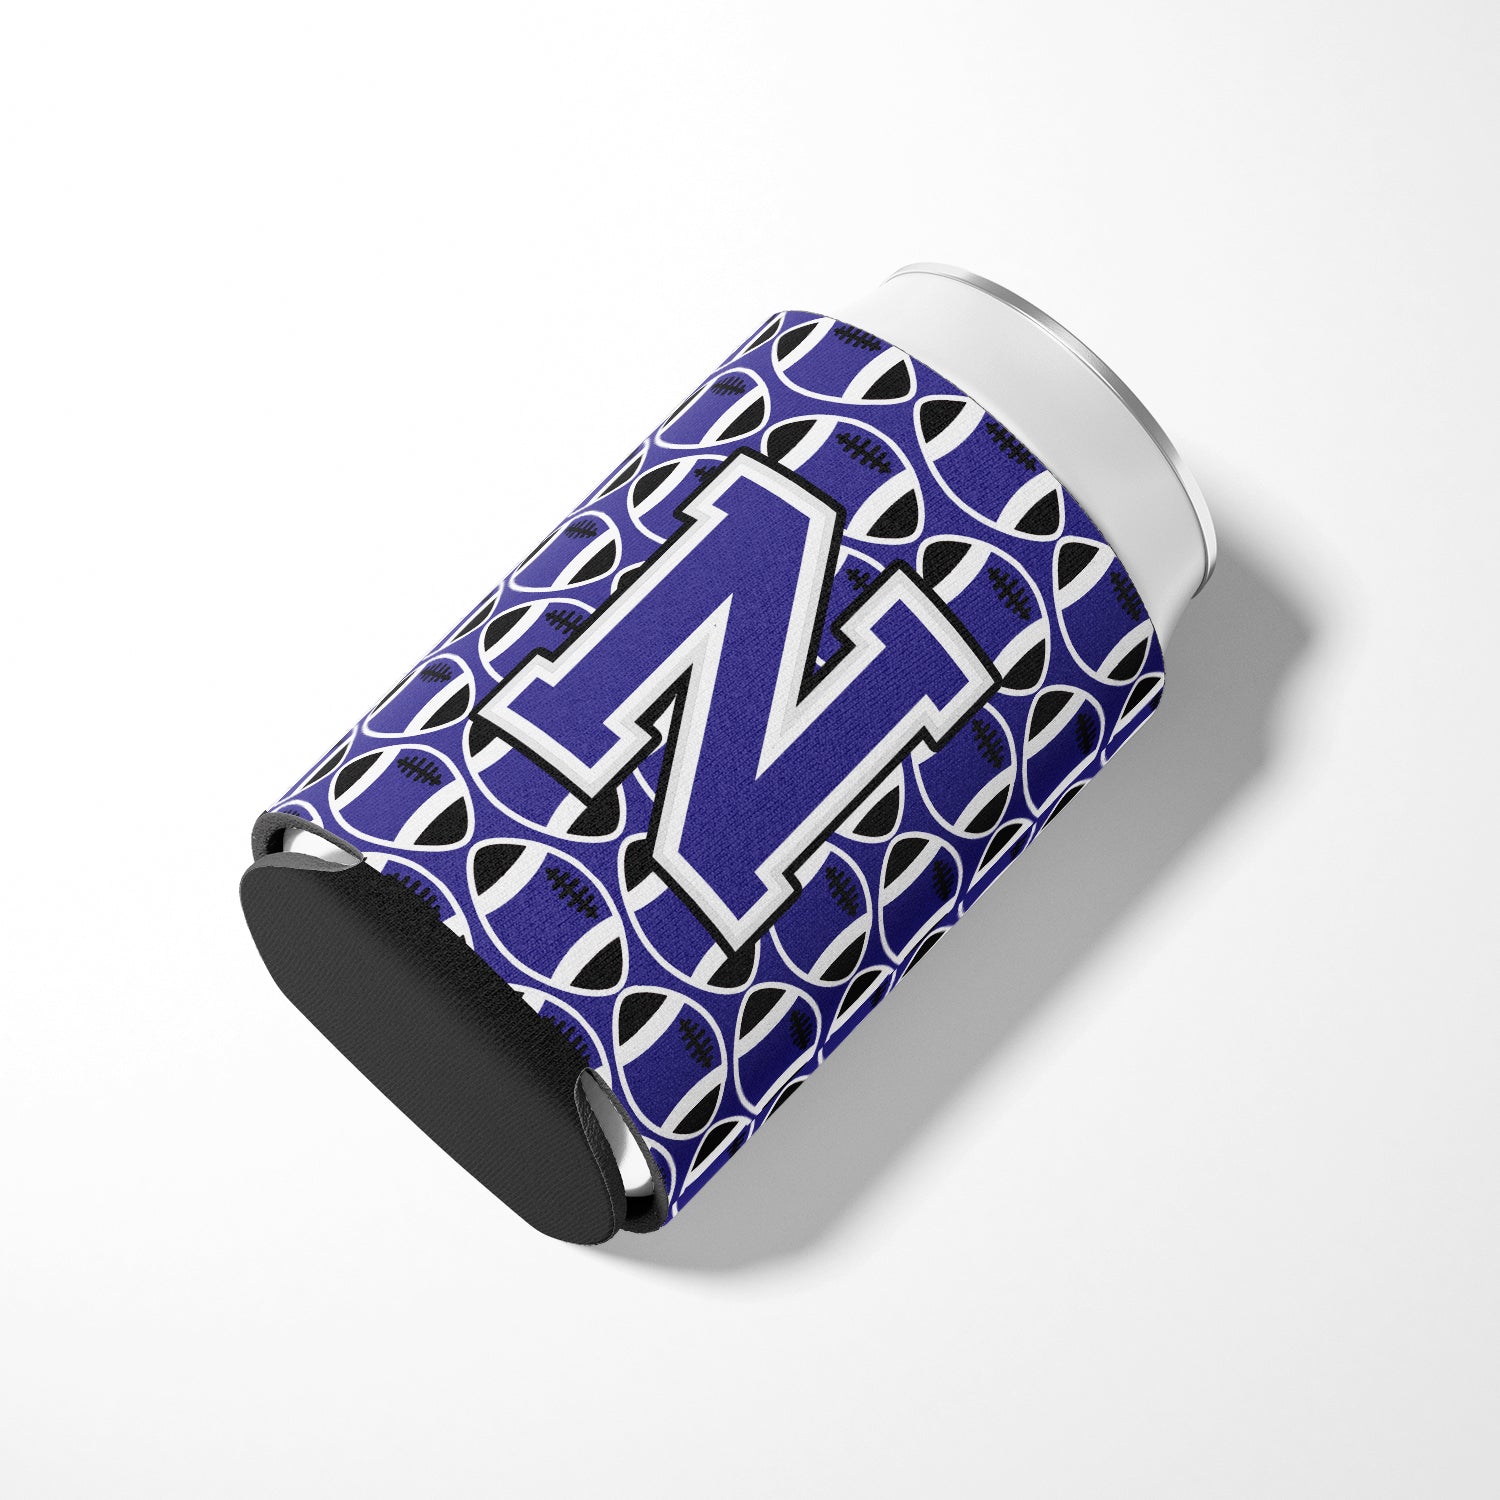 Letter N Football Purple and White Can or Bottle Hugger CJ1068-NCC.